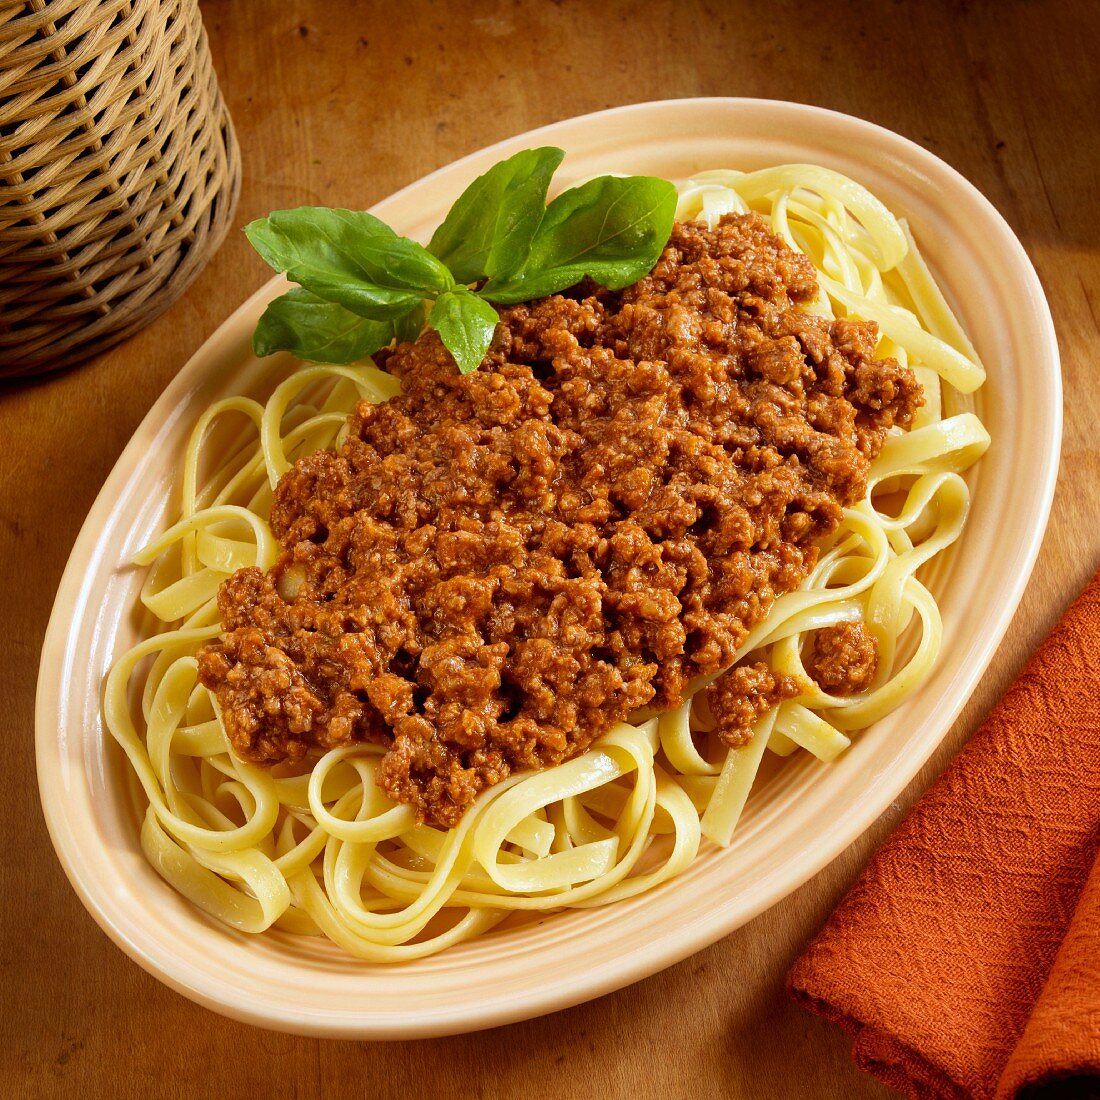 Fetuccini pasta with a meat sauce garnished with basil